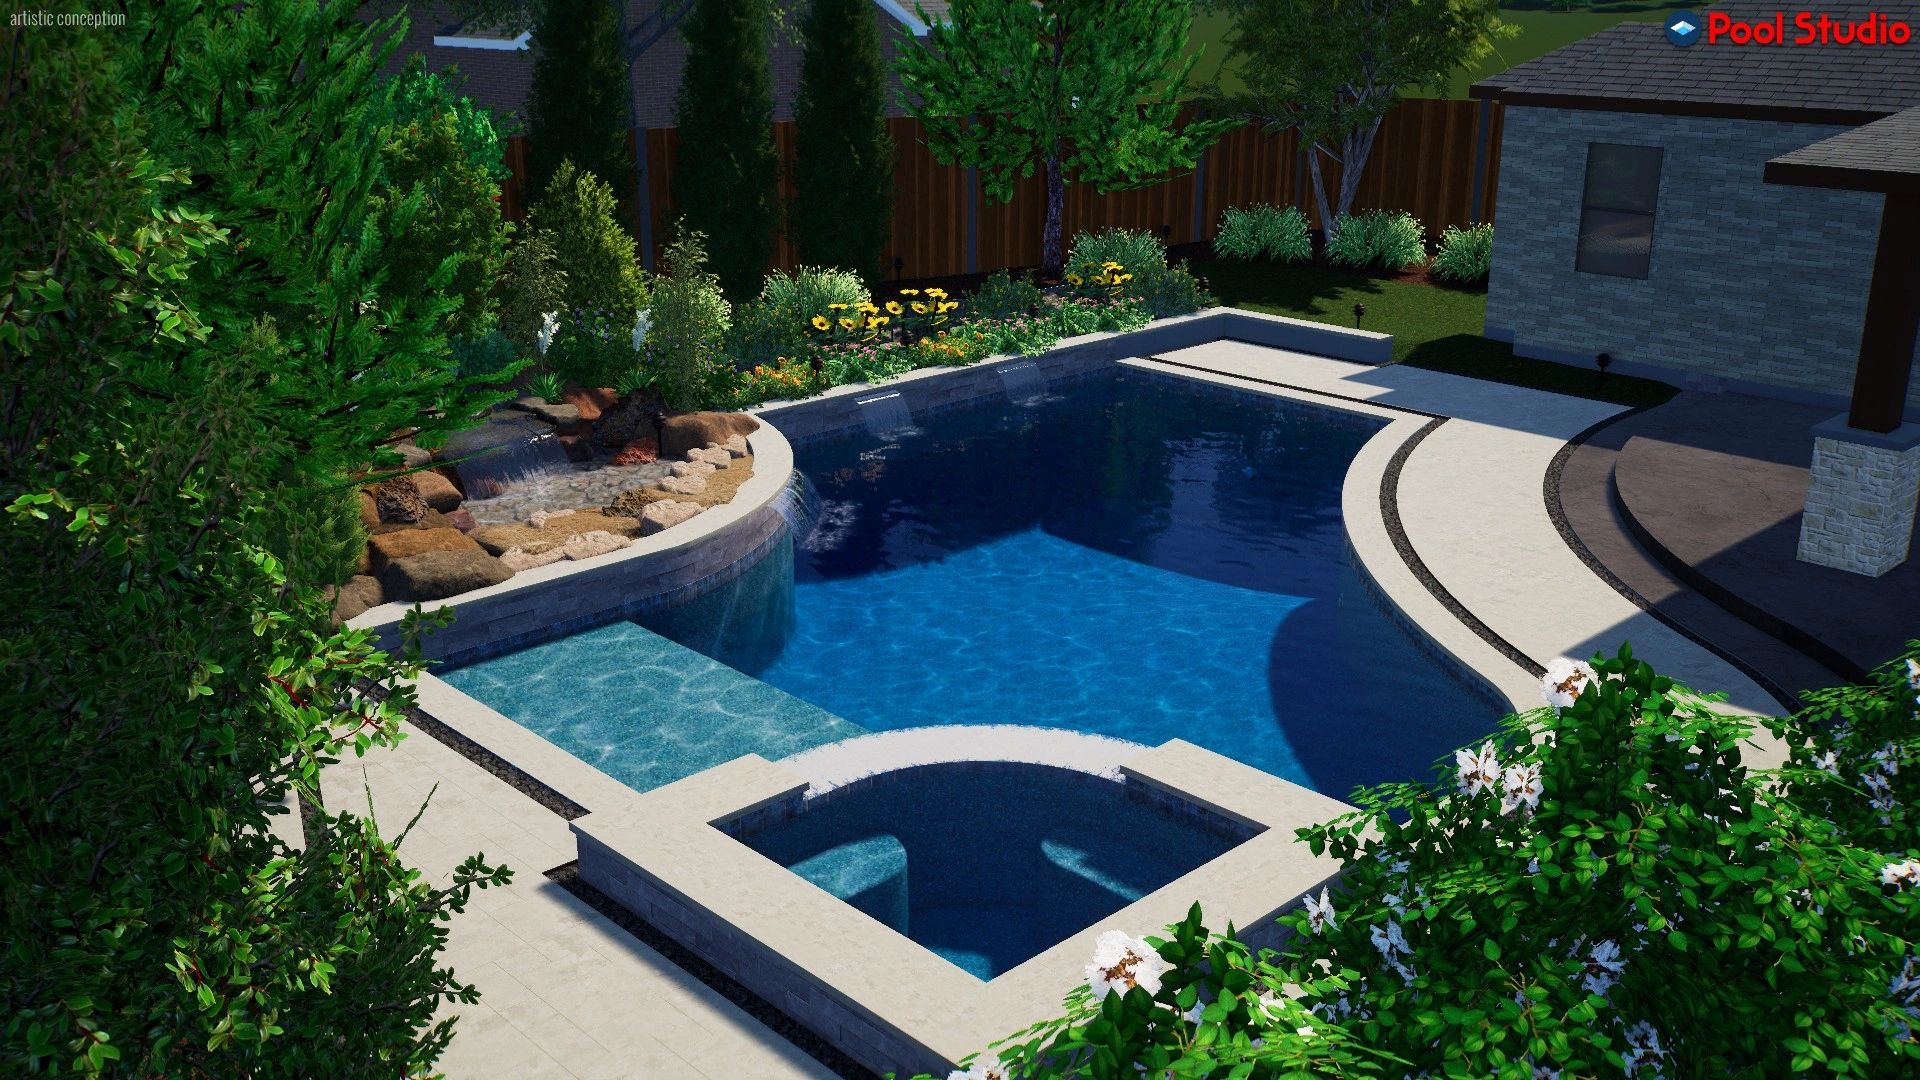 dallas richardson build a new pool 2 Dallas Pool Builders: Transforming Dreams into Reality with Integrity Pools